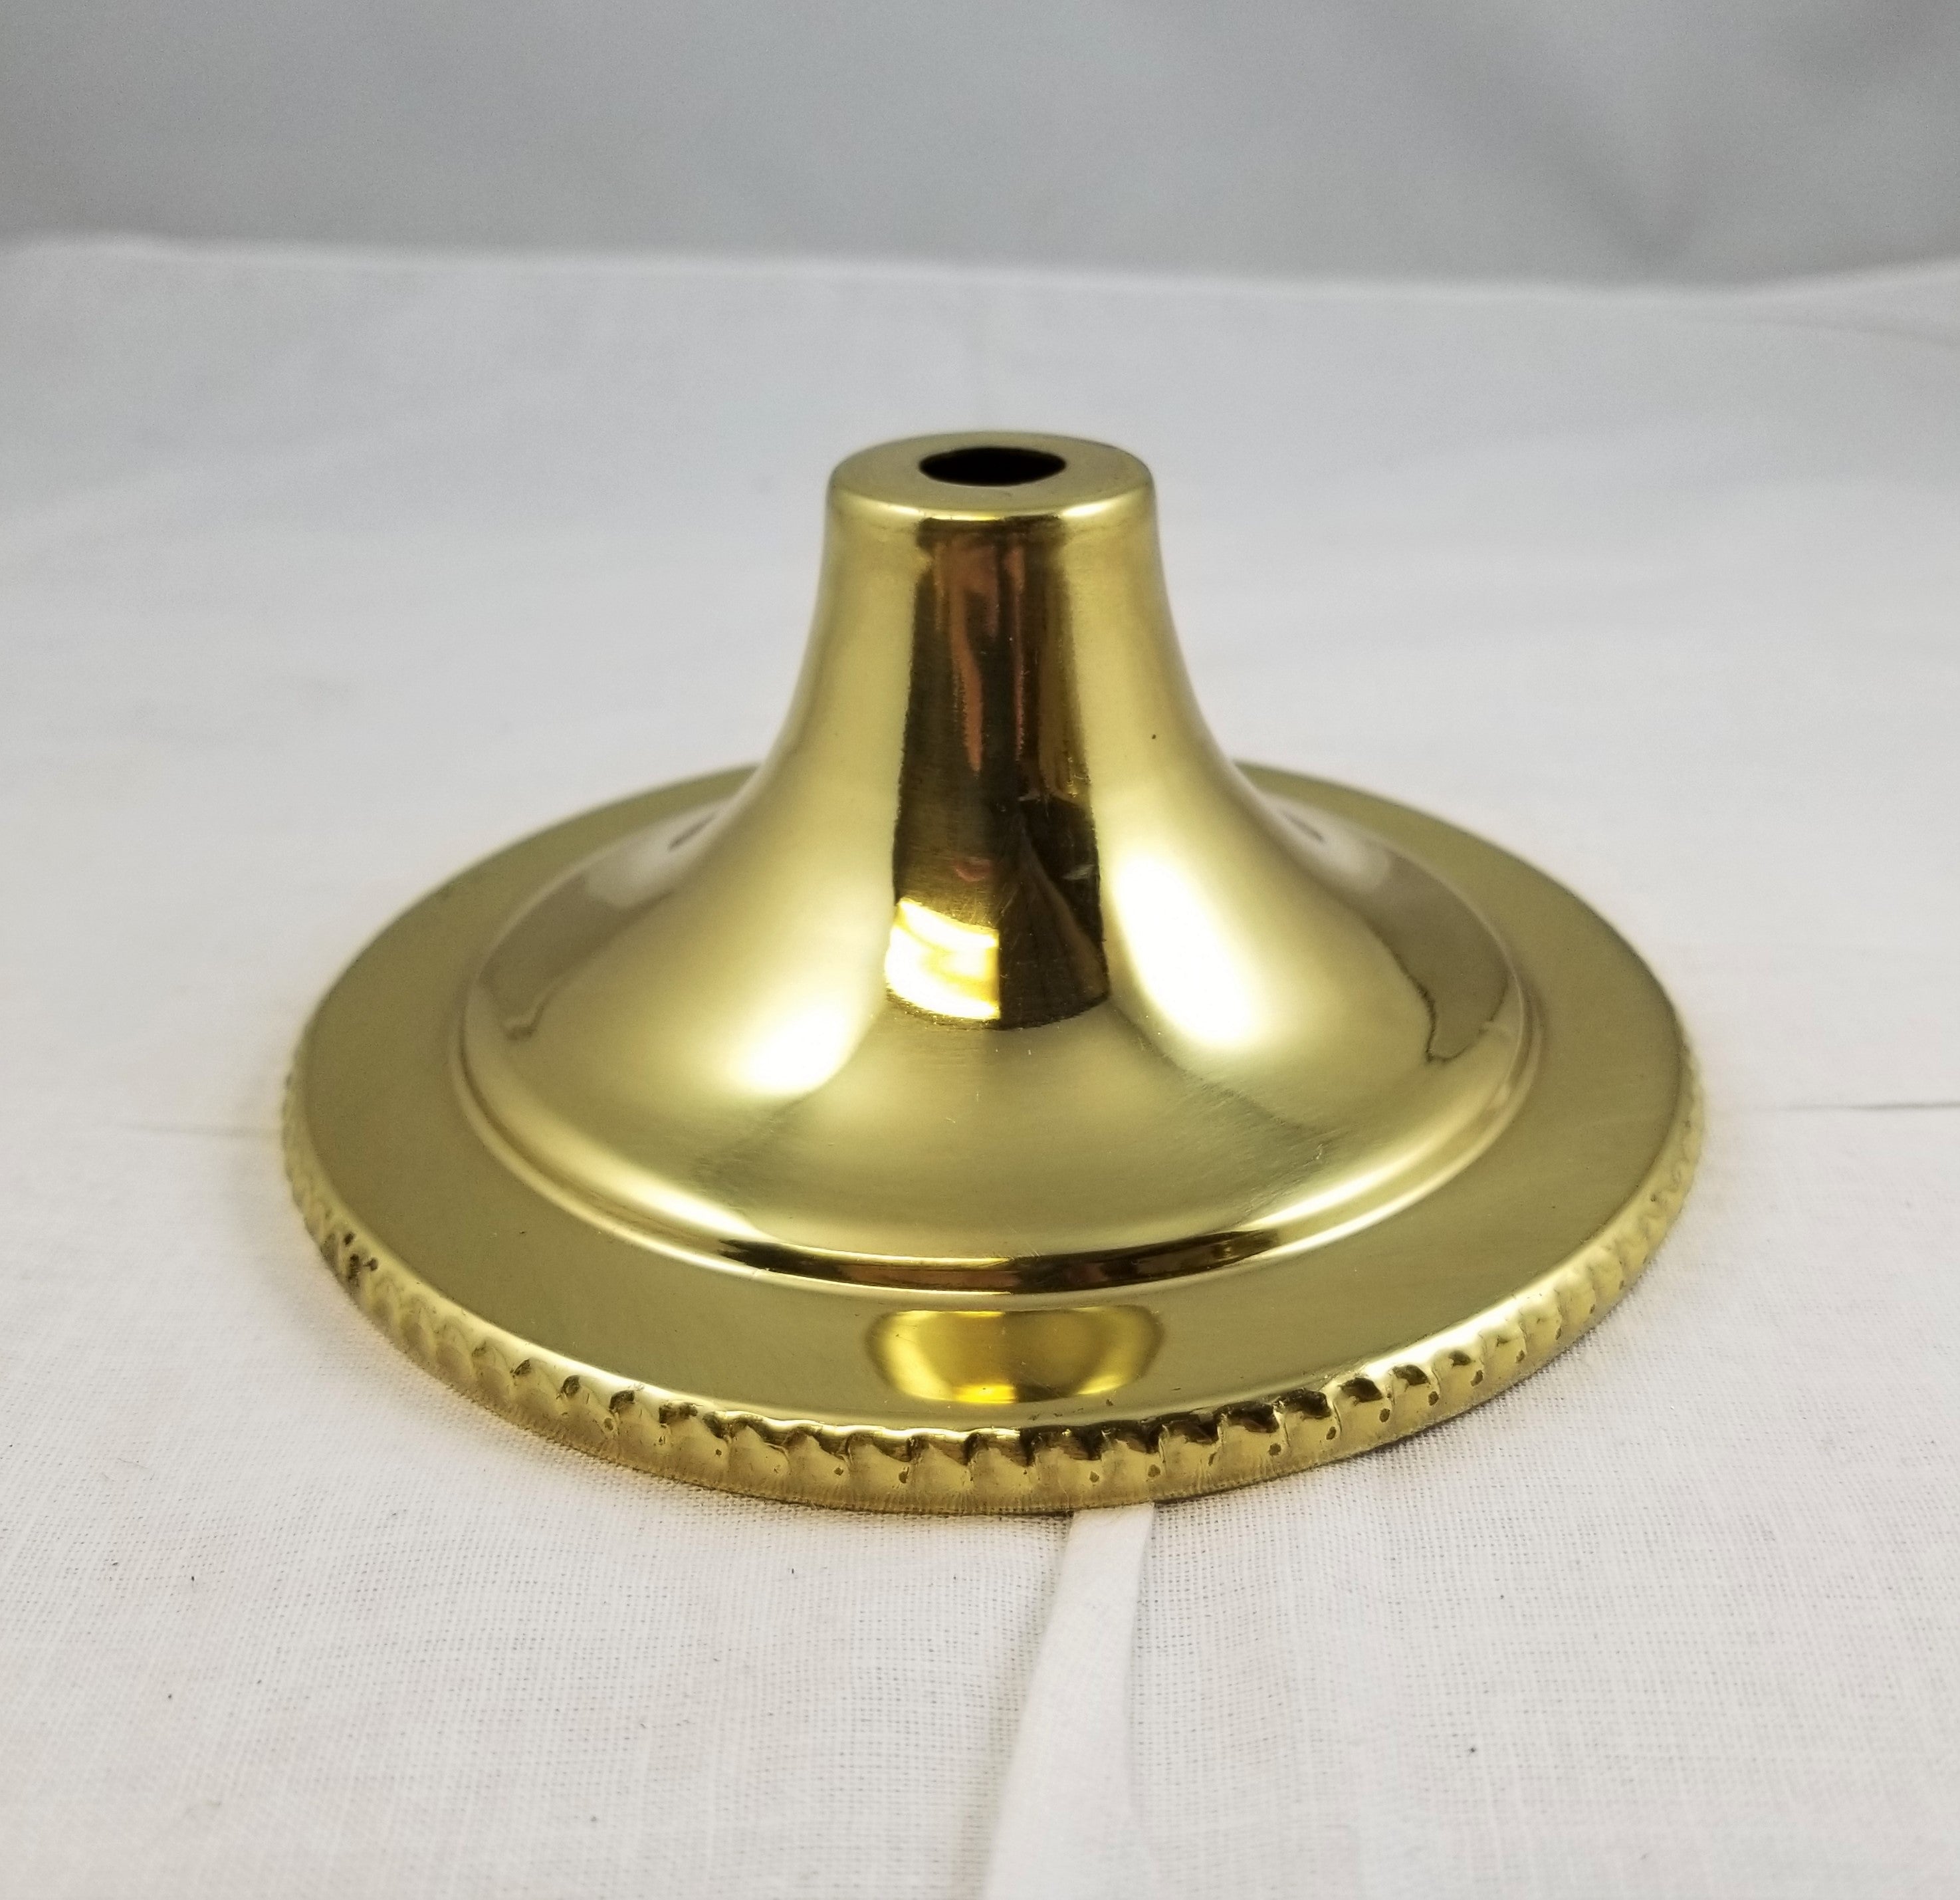 Brass Cap - 3-15/16" Diameter - 2" High - Polished & Lacquered